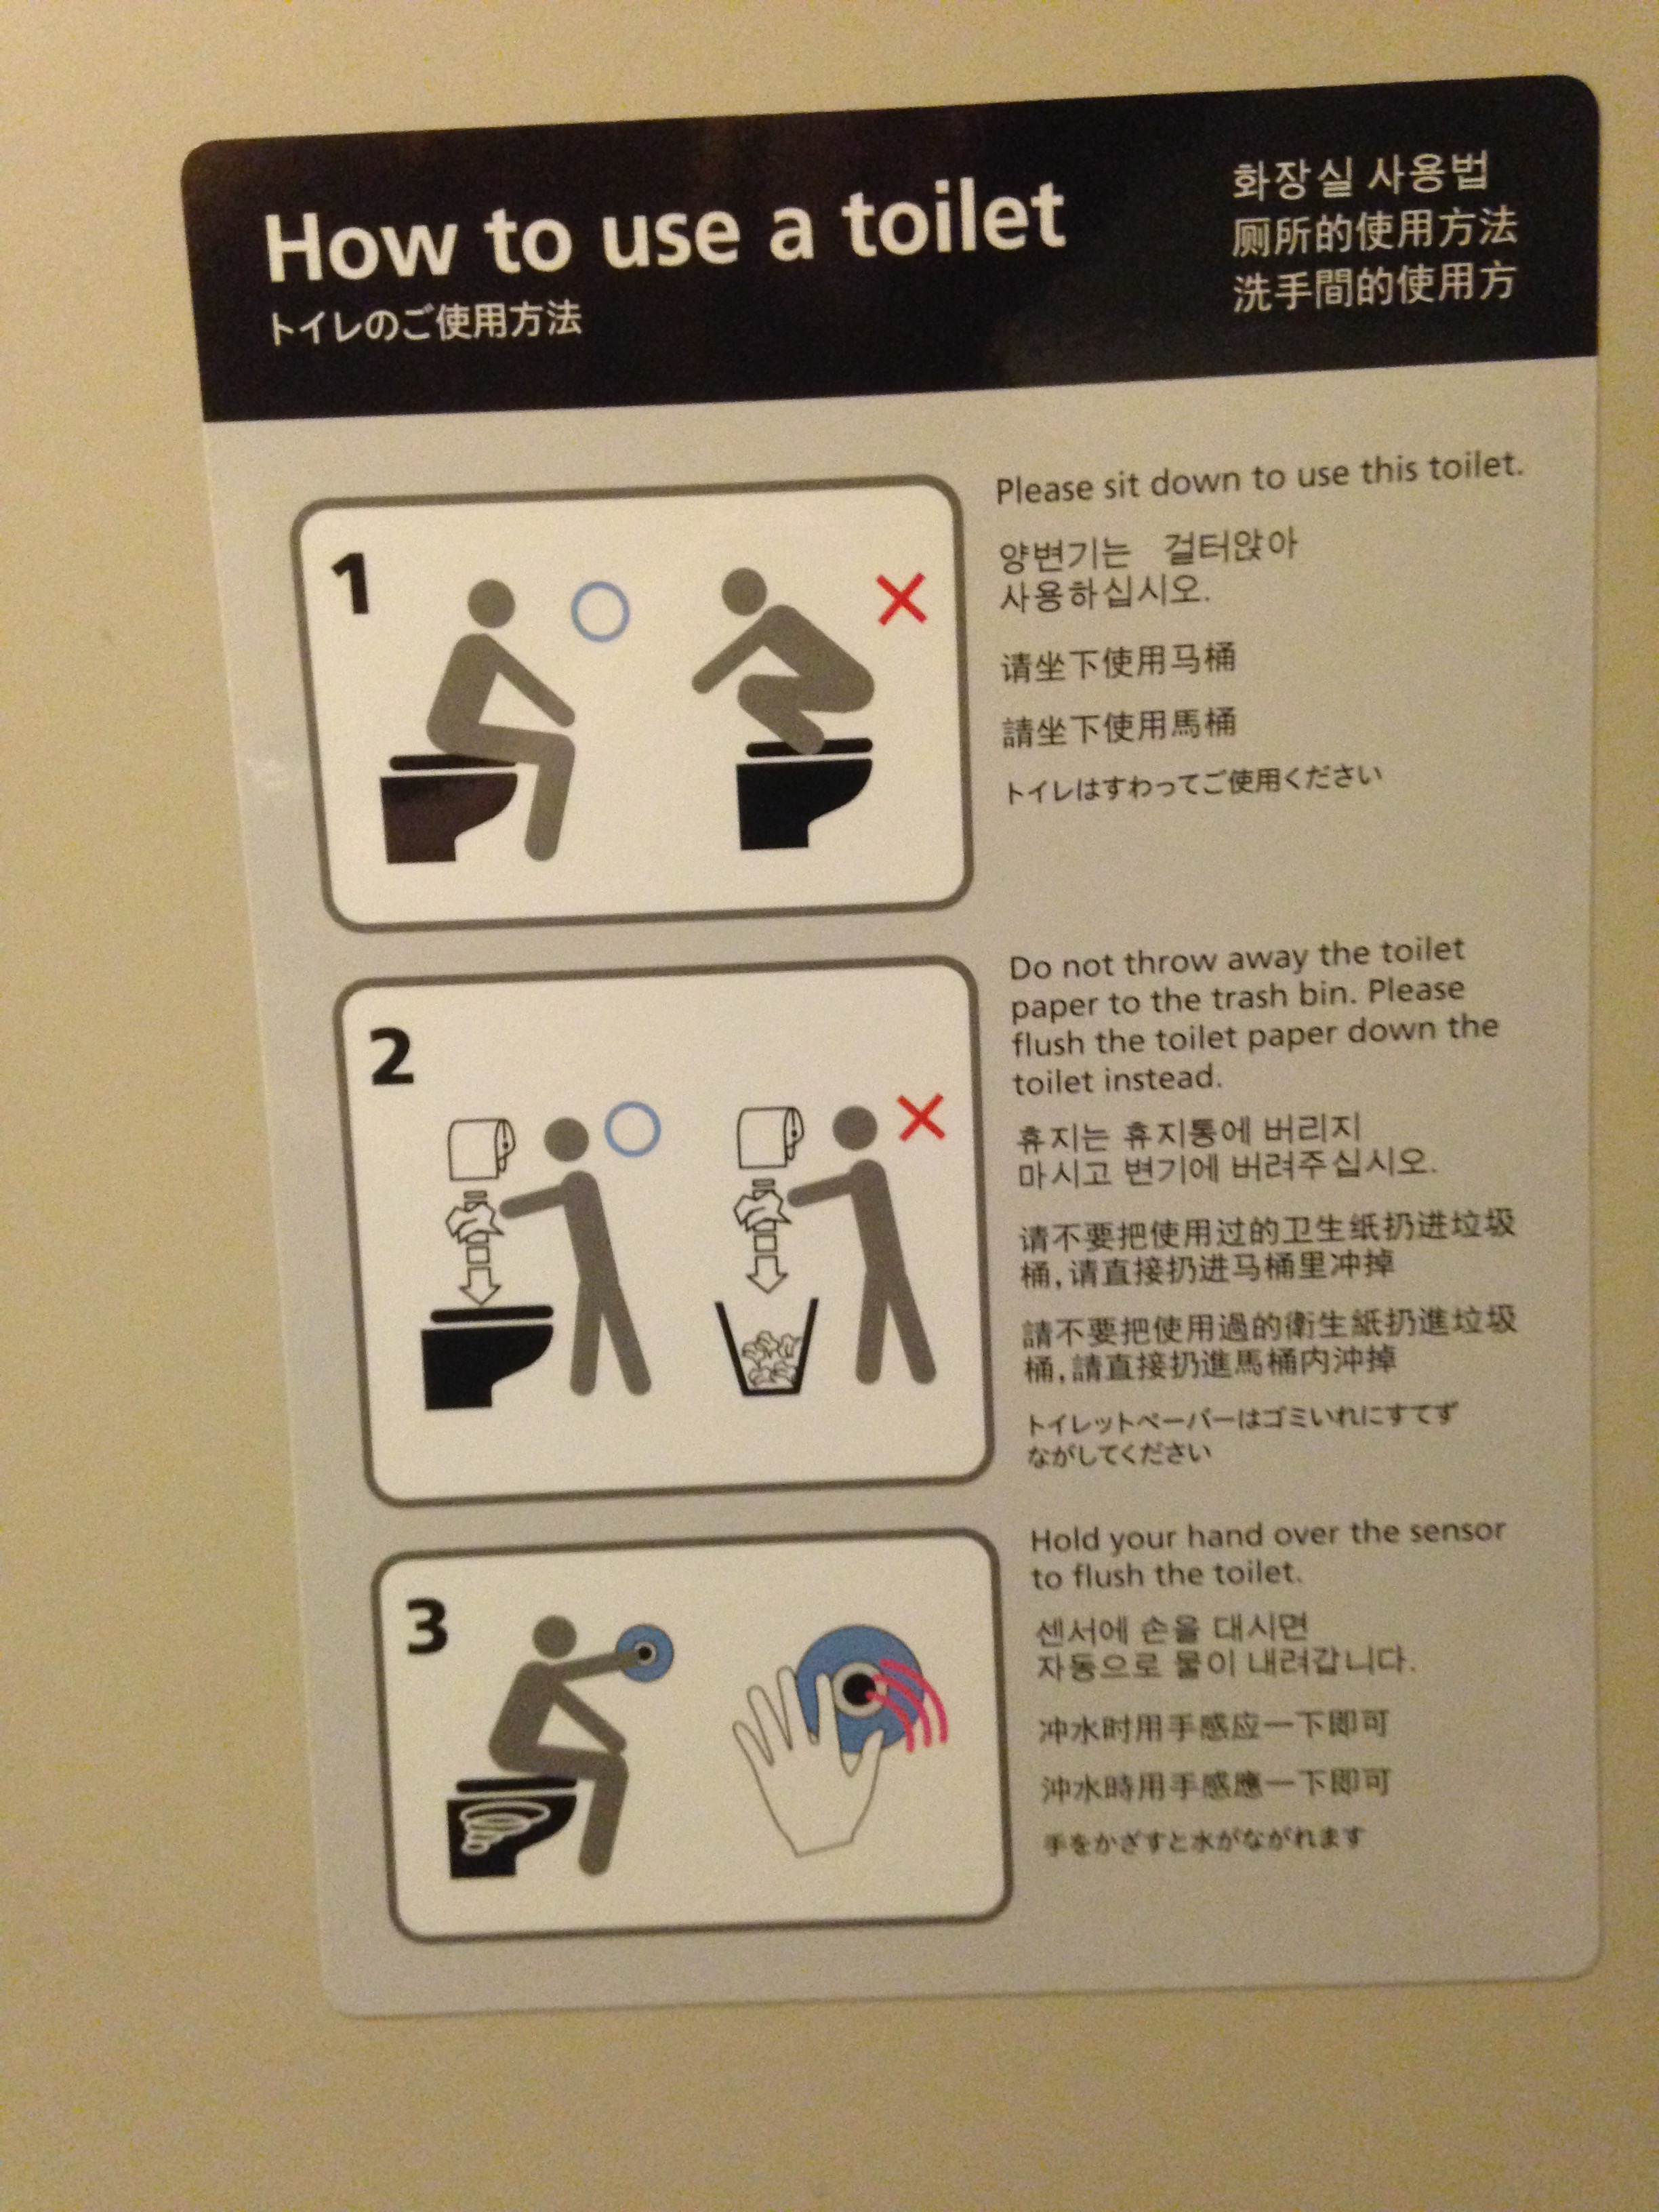 Three annotated pictures under the heading “How to use a toilet”, annotated in English, Korean, Japanese, and several more. Picture 1: An “OK” (blue circle) picture of a person sitting on a toilet, next to a “bad” (red X) picture of a person squatting on a toilet facing the wall. The English text reads “Please sit down to use this toilet.” Picture 2: An “OK” picture of a person taking toilet paper from a roll above the toilet and placing it in the toilet, and a “bad” picture of a person taking toilet paper from a roll above a trash can and placing it in the trash can. The text reads “Do not throw away the toilet paper to the trash bin. Please flush the toilet paper down the toilet instead.” Picture 3: A person places their hand over a blue circular target on the wall, with waves emanating from it, and the toilet shows circles indicating flushing. The text reads “Hold your hand over the sensor to flush the toilet.”